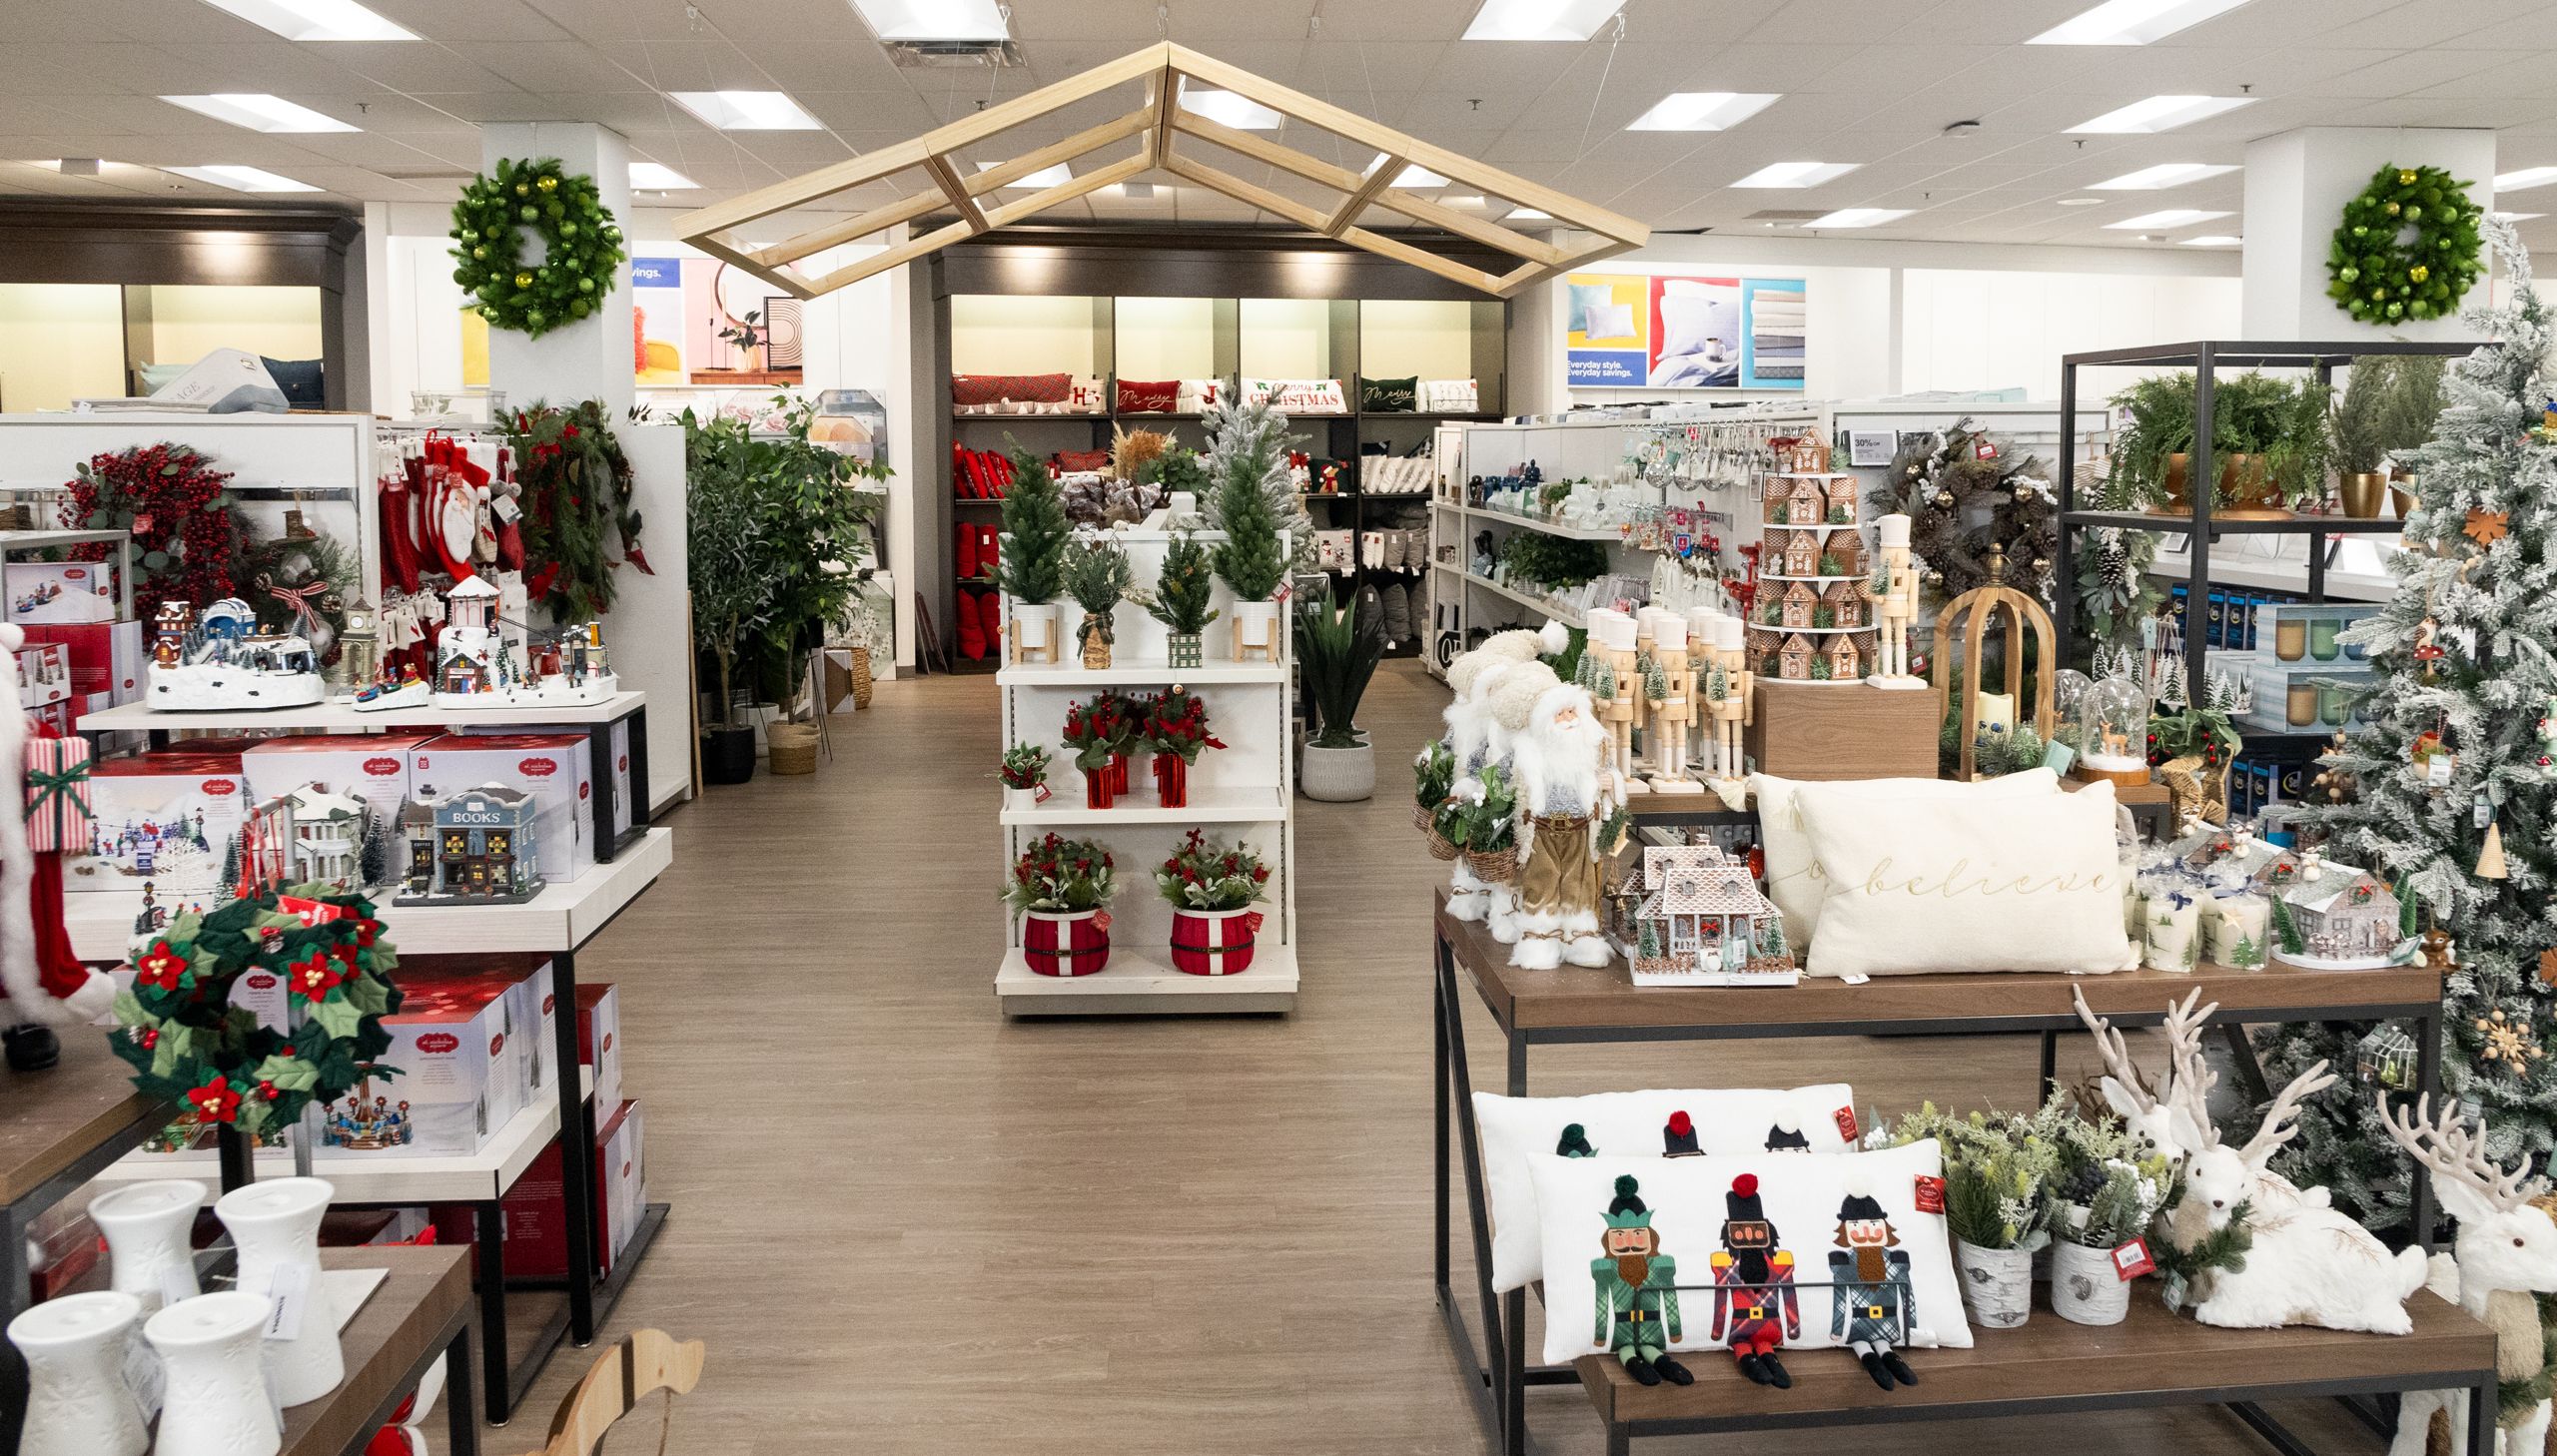 https://corporate.kohls.com/content/dam/kohlscorp/media-gallery/images/holiday-strategy-2023/125842%20-%20PR%20Holiday%20Stores_Brookfield-2023-web-10575.jpg